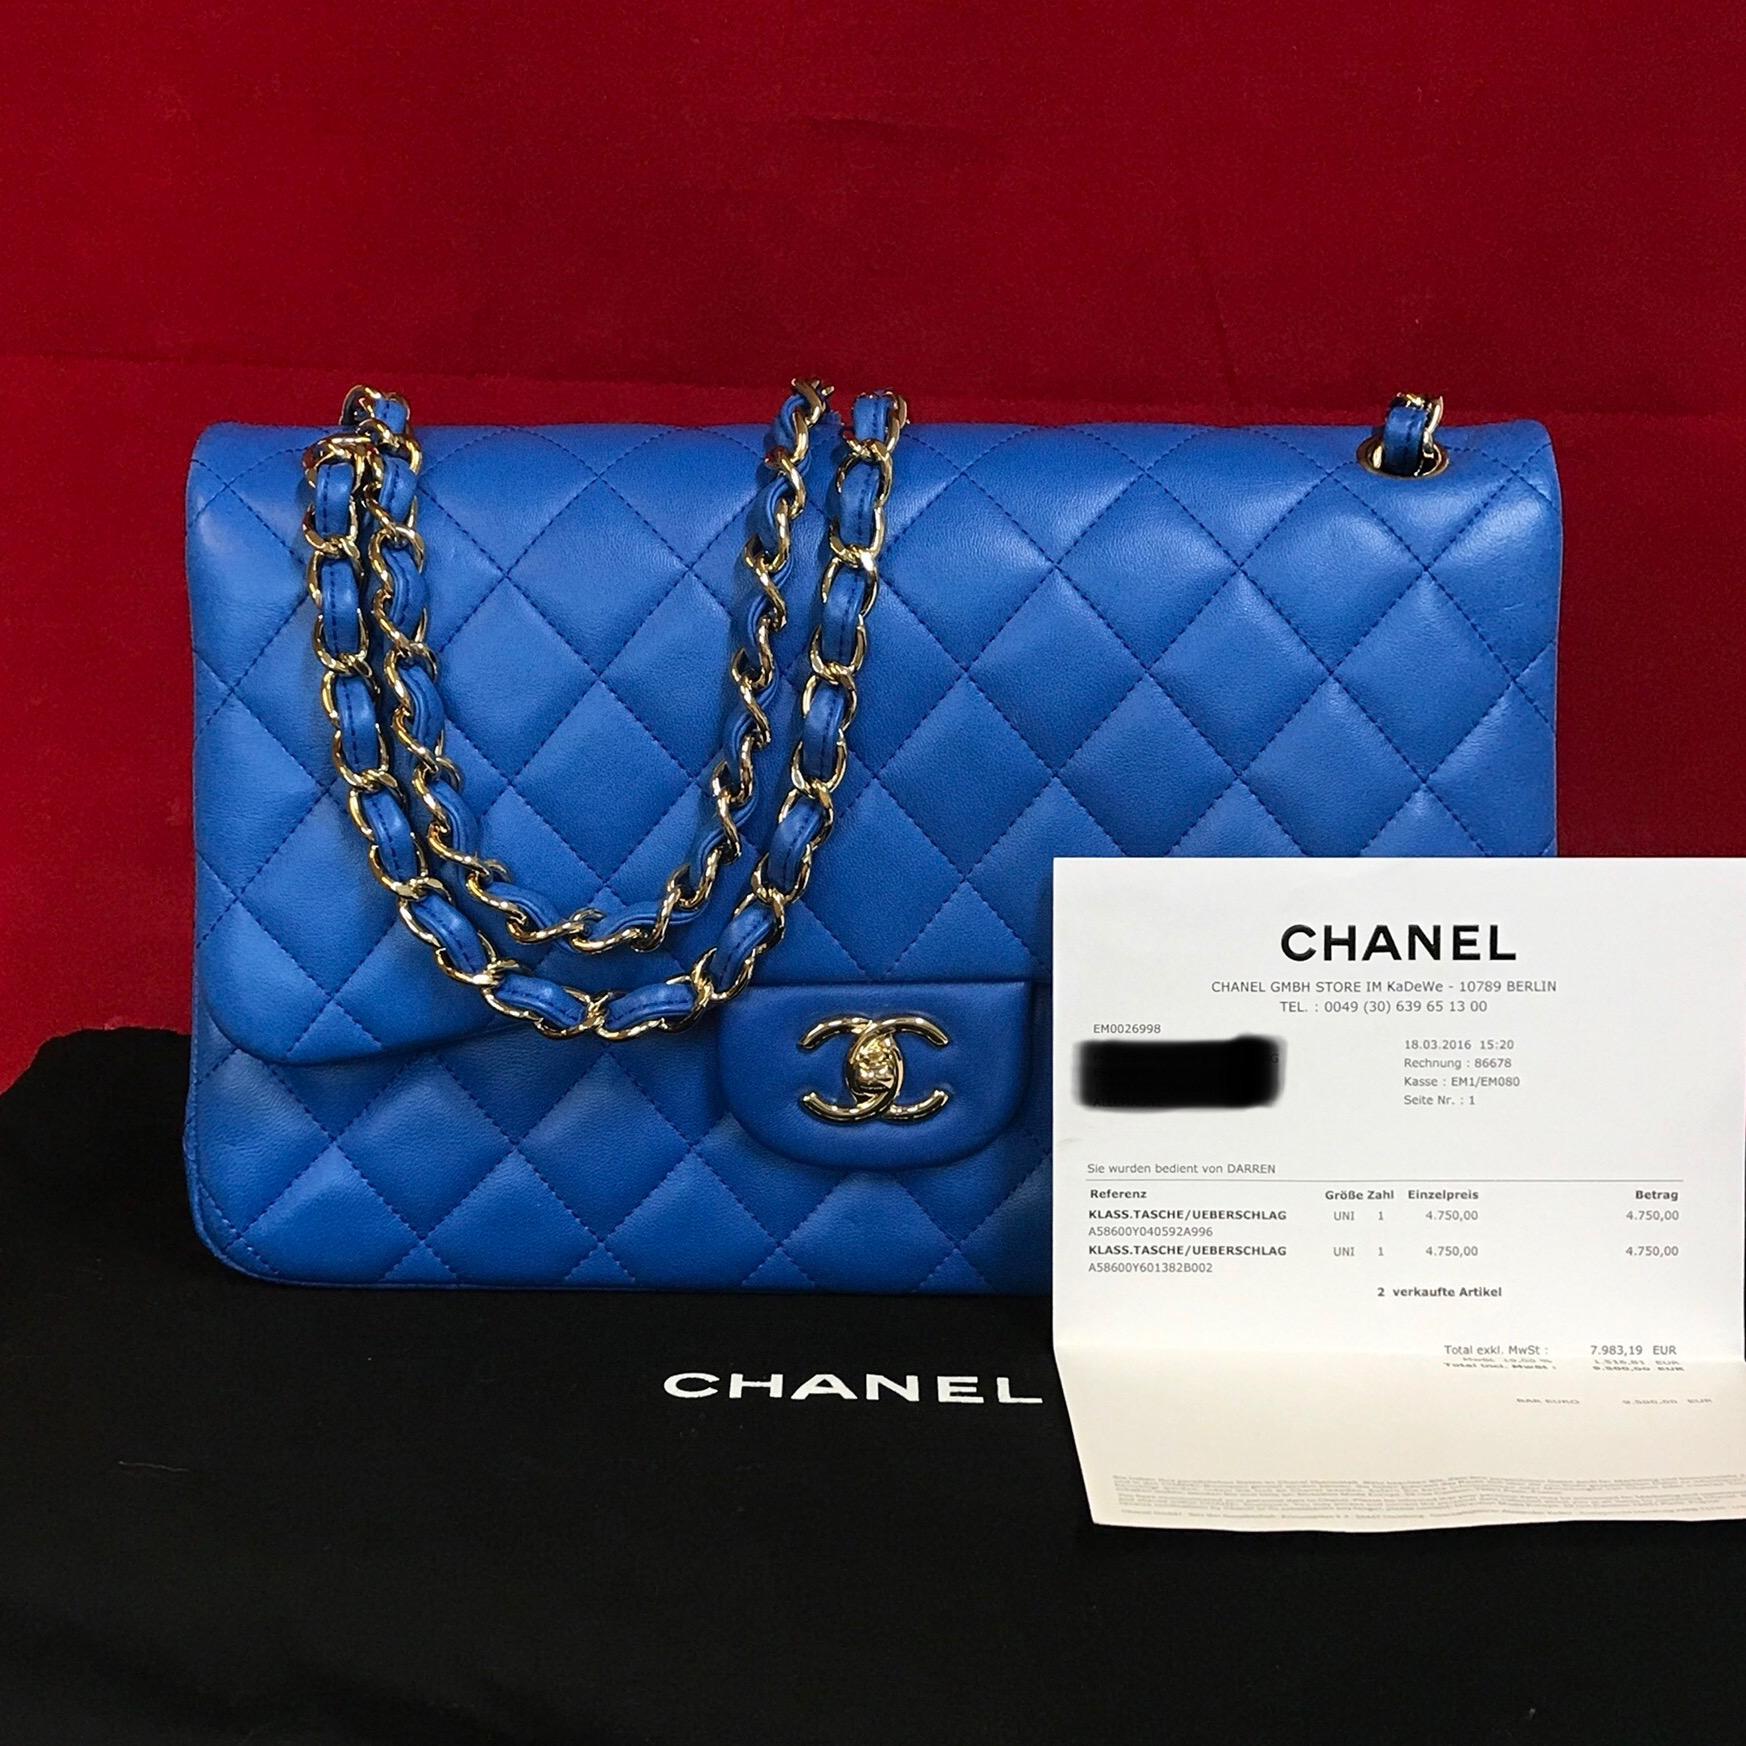 CHANEL double flap Bag Jumbo made of blue quilted lambskin.

The bag is in a very good condition and has minimal signs of use.

The delivery includes:
- Chanel double flap bag Jumbo
- Dustbag
- Original CHANEL bill of 2016

Dimensions:
12 x 8 x 3